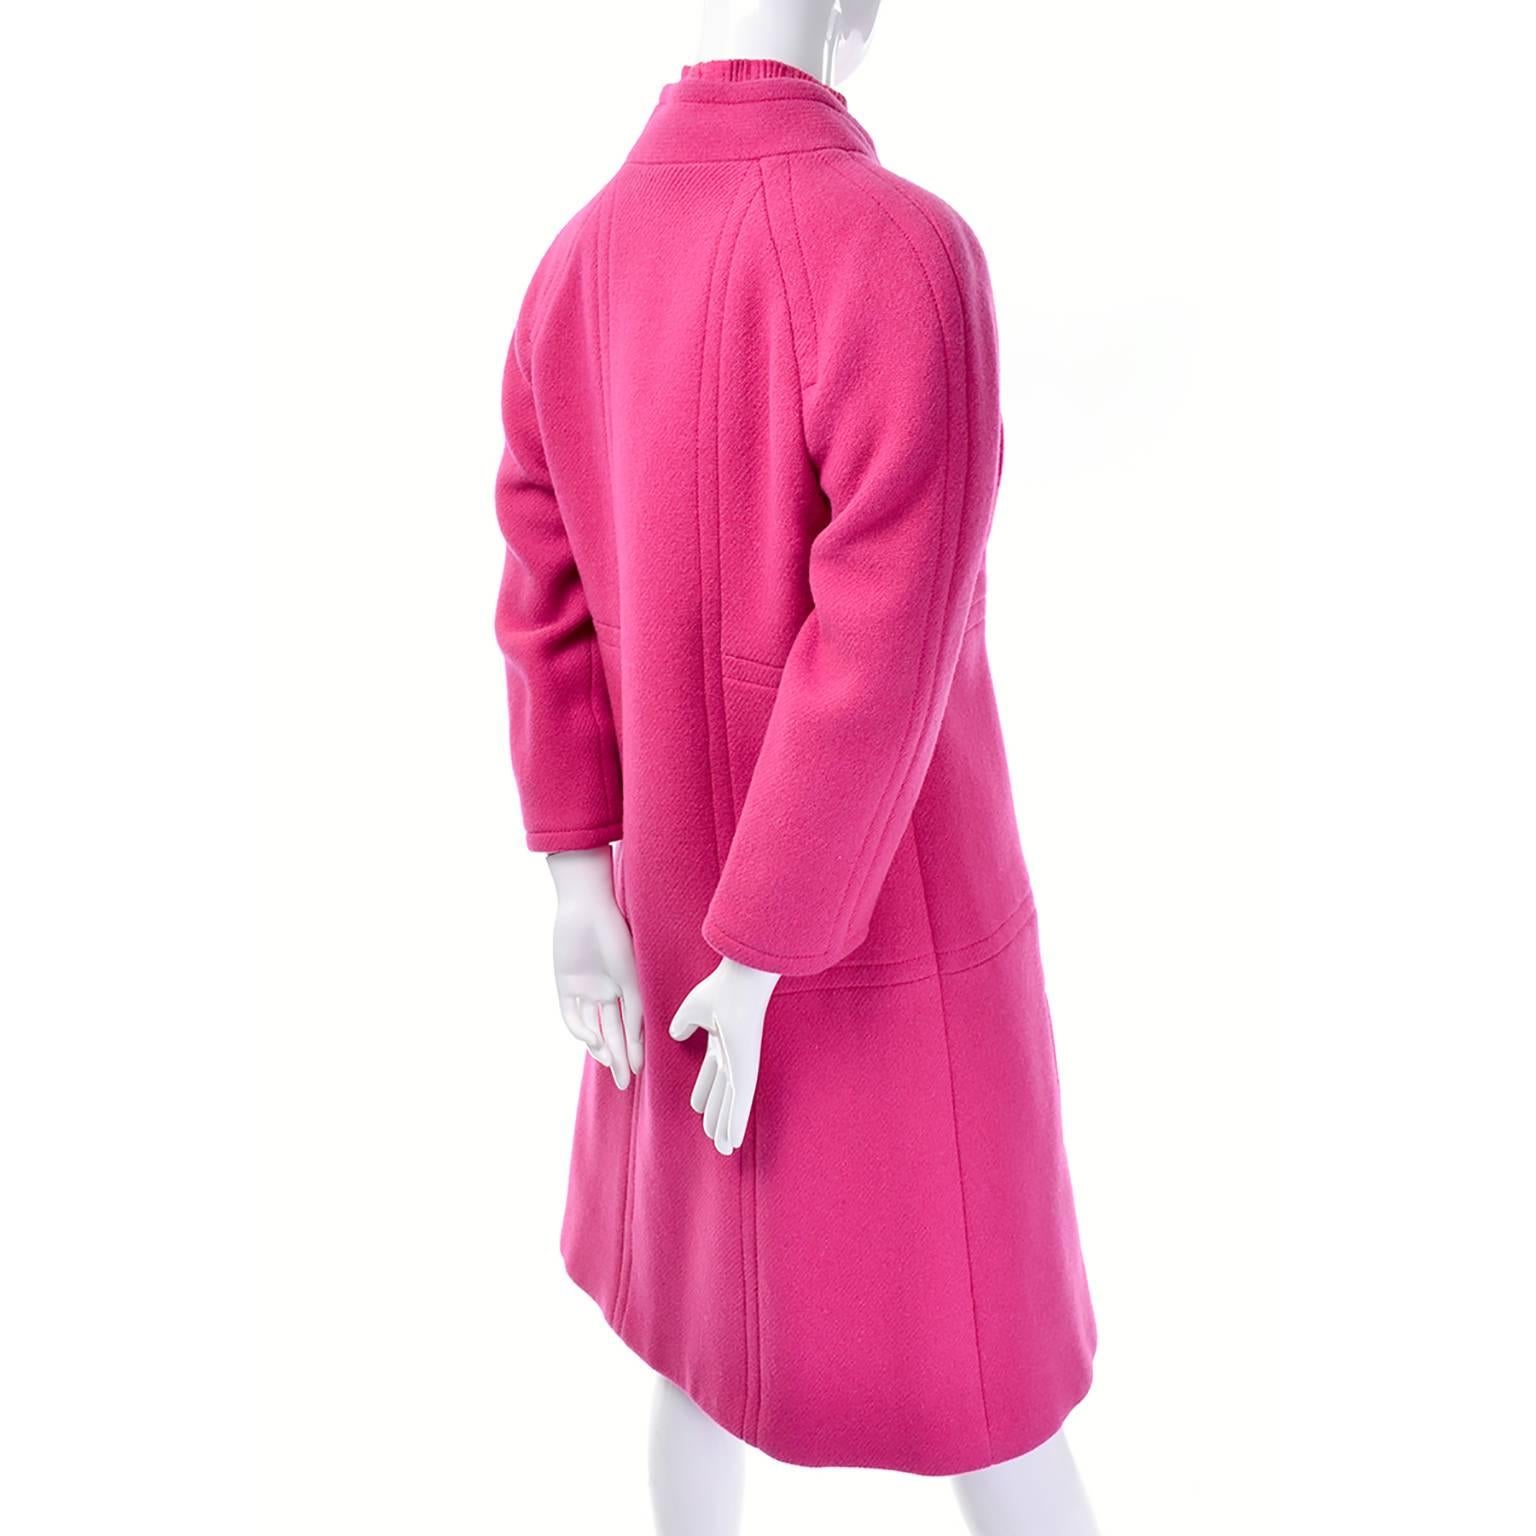 Women's 1960s Via Tornabuoni Florence Italy Pink Vintage Coat Suit Skirt Top C Ciani